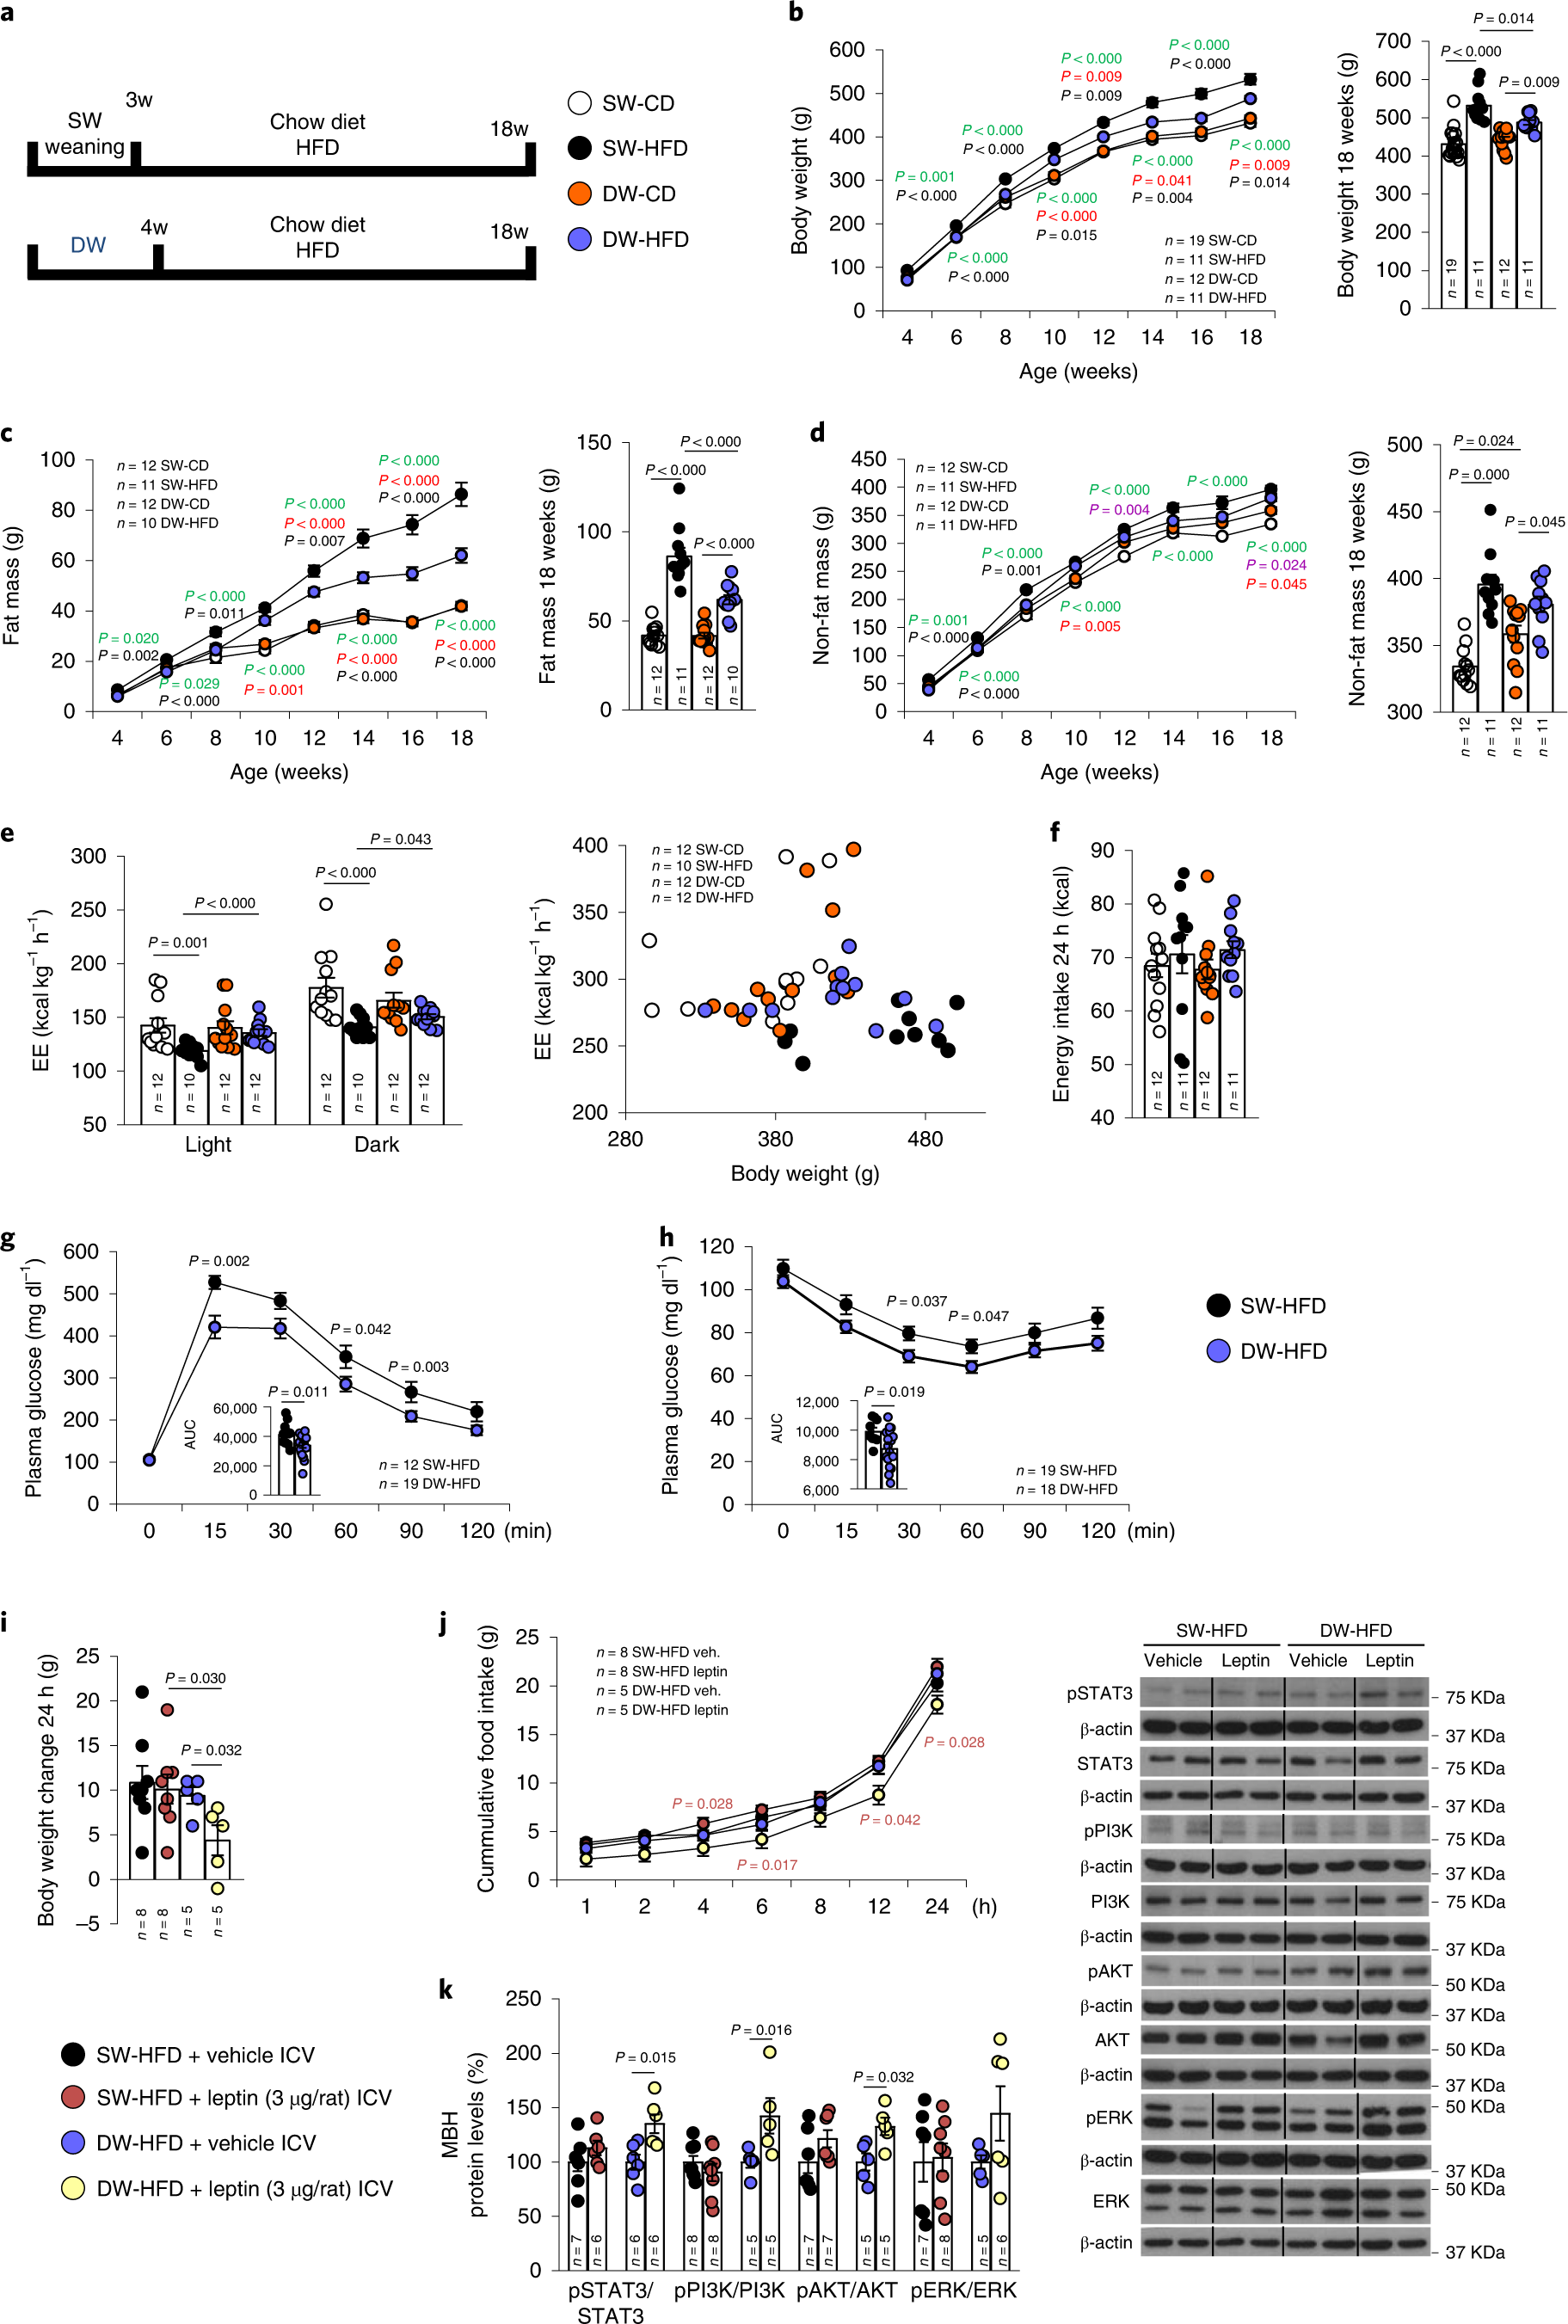 Prolonged breastfeeding protects from obesity by hypothalamic action of  hepatic FGF21 | Nature Metabolism